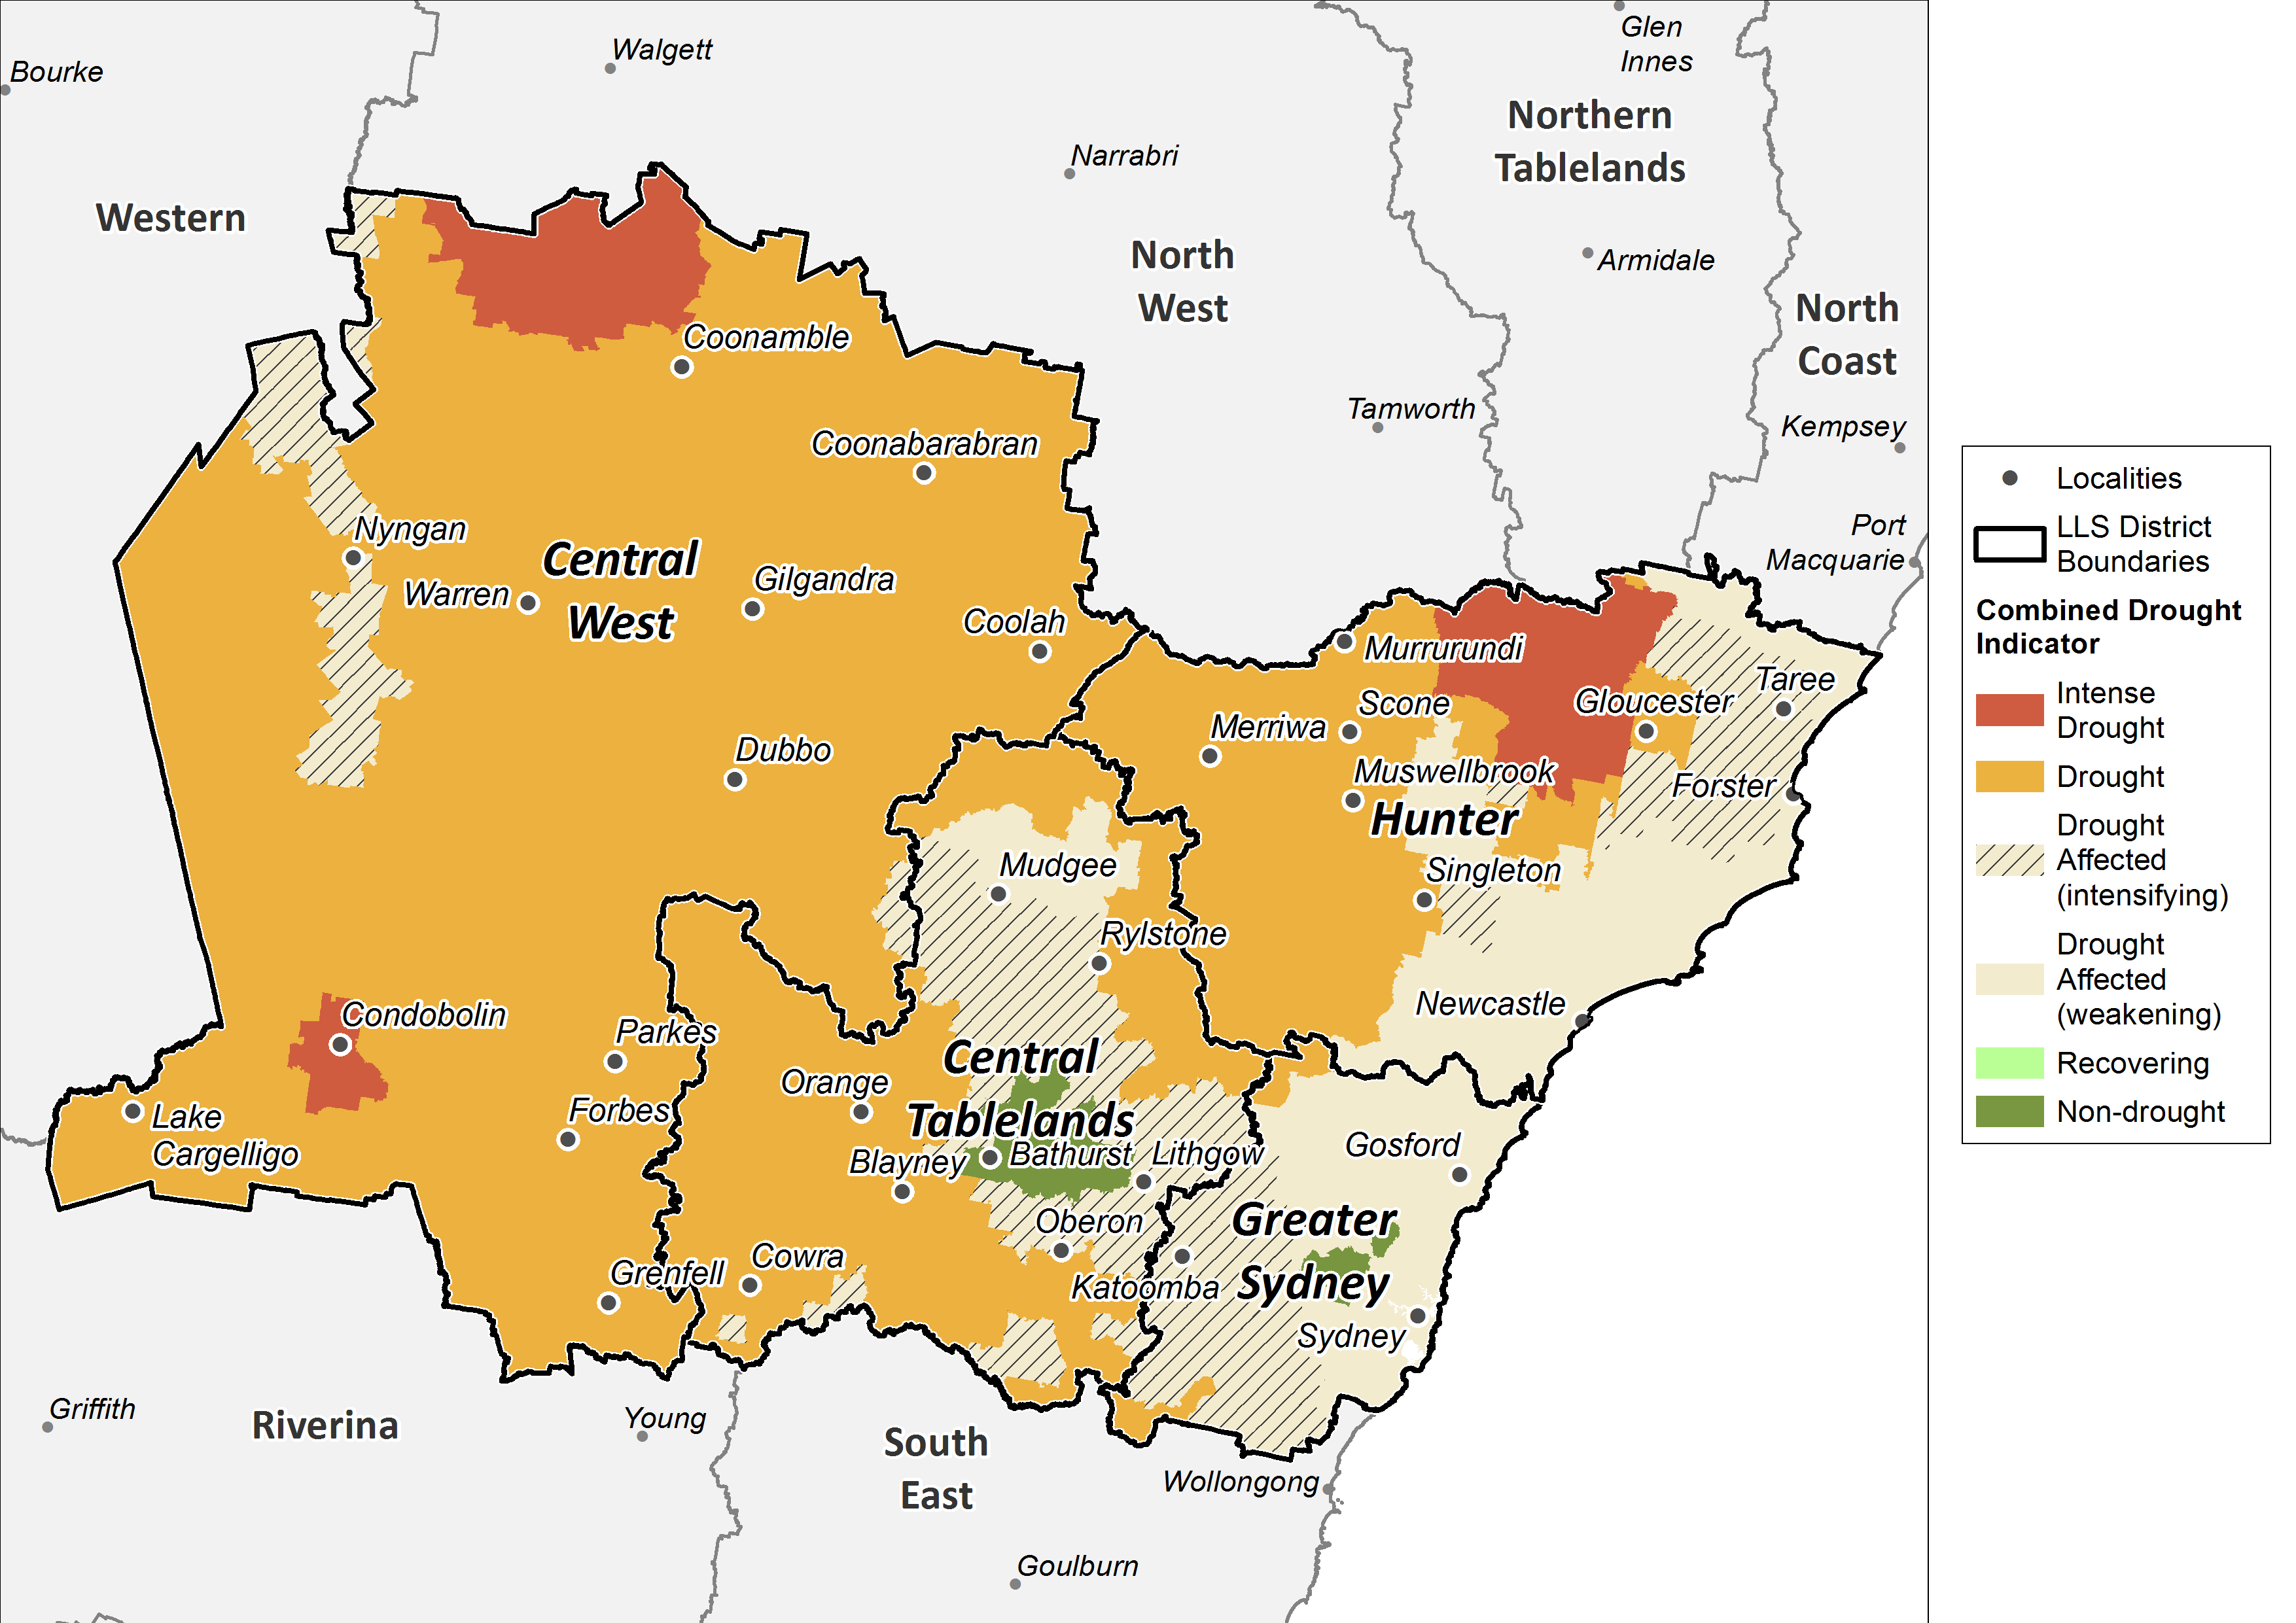 Combined Drought Indicator for the Central Tablelands, Central West, Hunter and Greater Sydney regions - For an accessible explanation of this image contact scott.wallace@dpi.nsw.gov.au